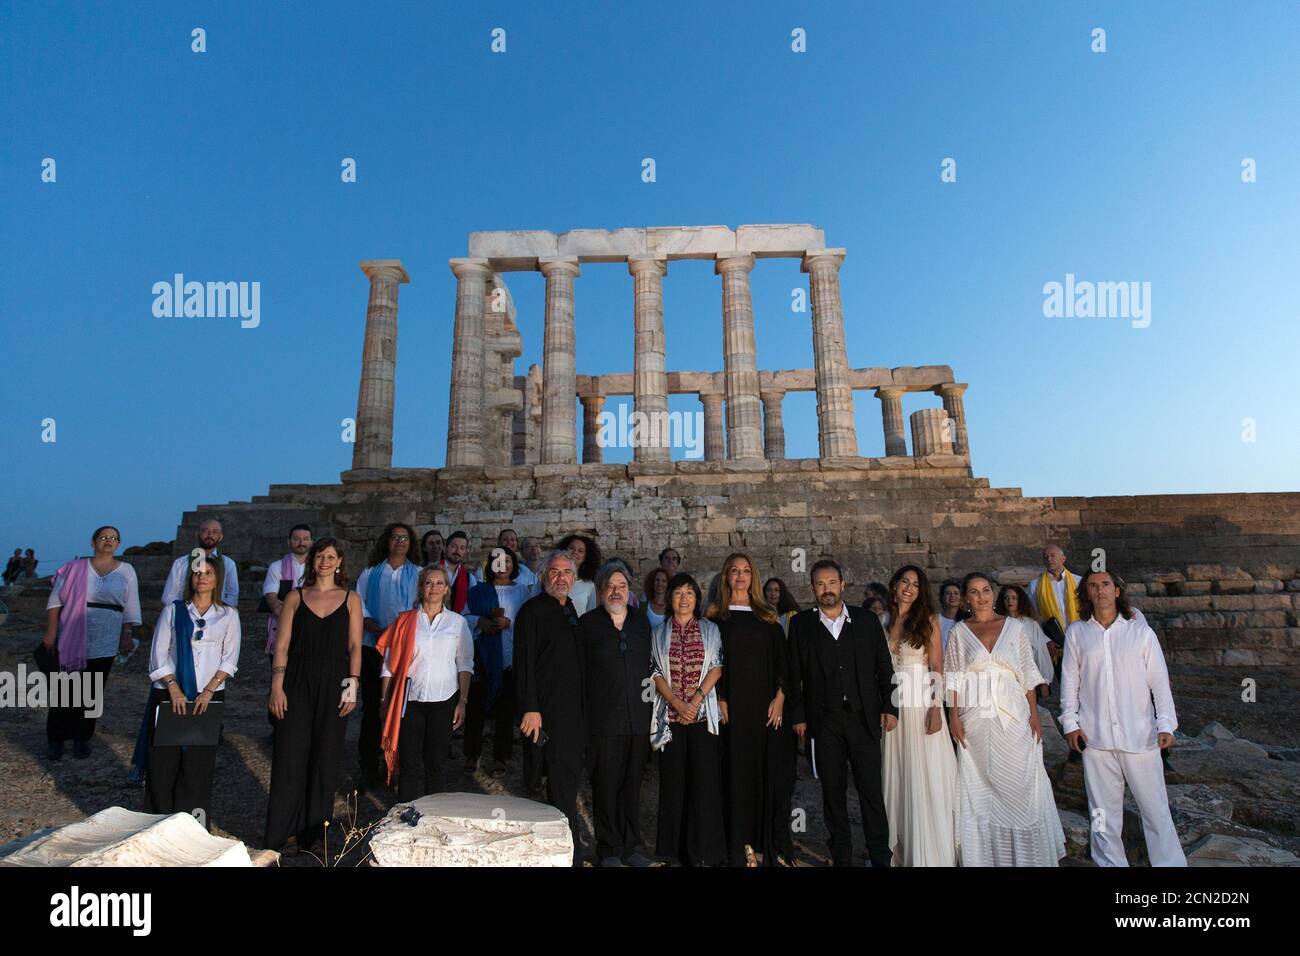 (200917) -- ATHENS, Sept. 17, 2020 (Xinhua) -- Chinese Ambassador to Greece Zhang Qiyue (6th R, Front) poses for a group photo with guests and musical performers in front of the ruins of the Temple of Poseidon at cape Sounion, some 70 km southeast of Athens, Greece, on Sept. 17, 2020. On the occasion of the 70th anniversary of the establishment of the Greek National Tourism Organization (GNTO) and the 71st anniversary of the founding of the People's Republic of China and the Mid-Autumn festival, a musical entitled 'As long as there shall be Achaeans -- Variations on a Sunbeam' was staged on Th Stock Photo